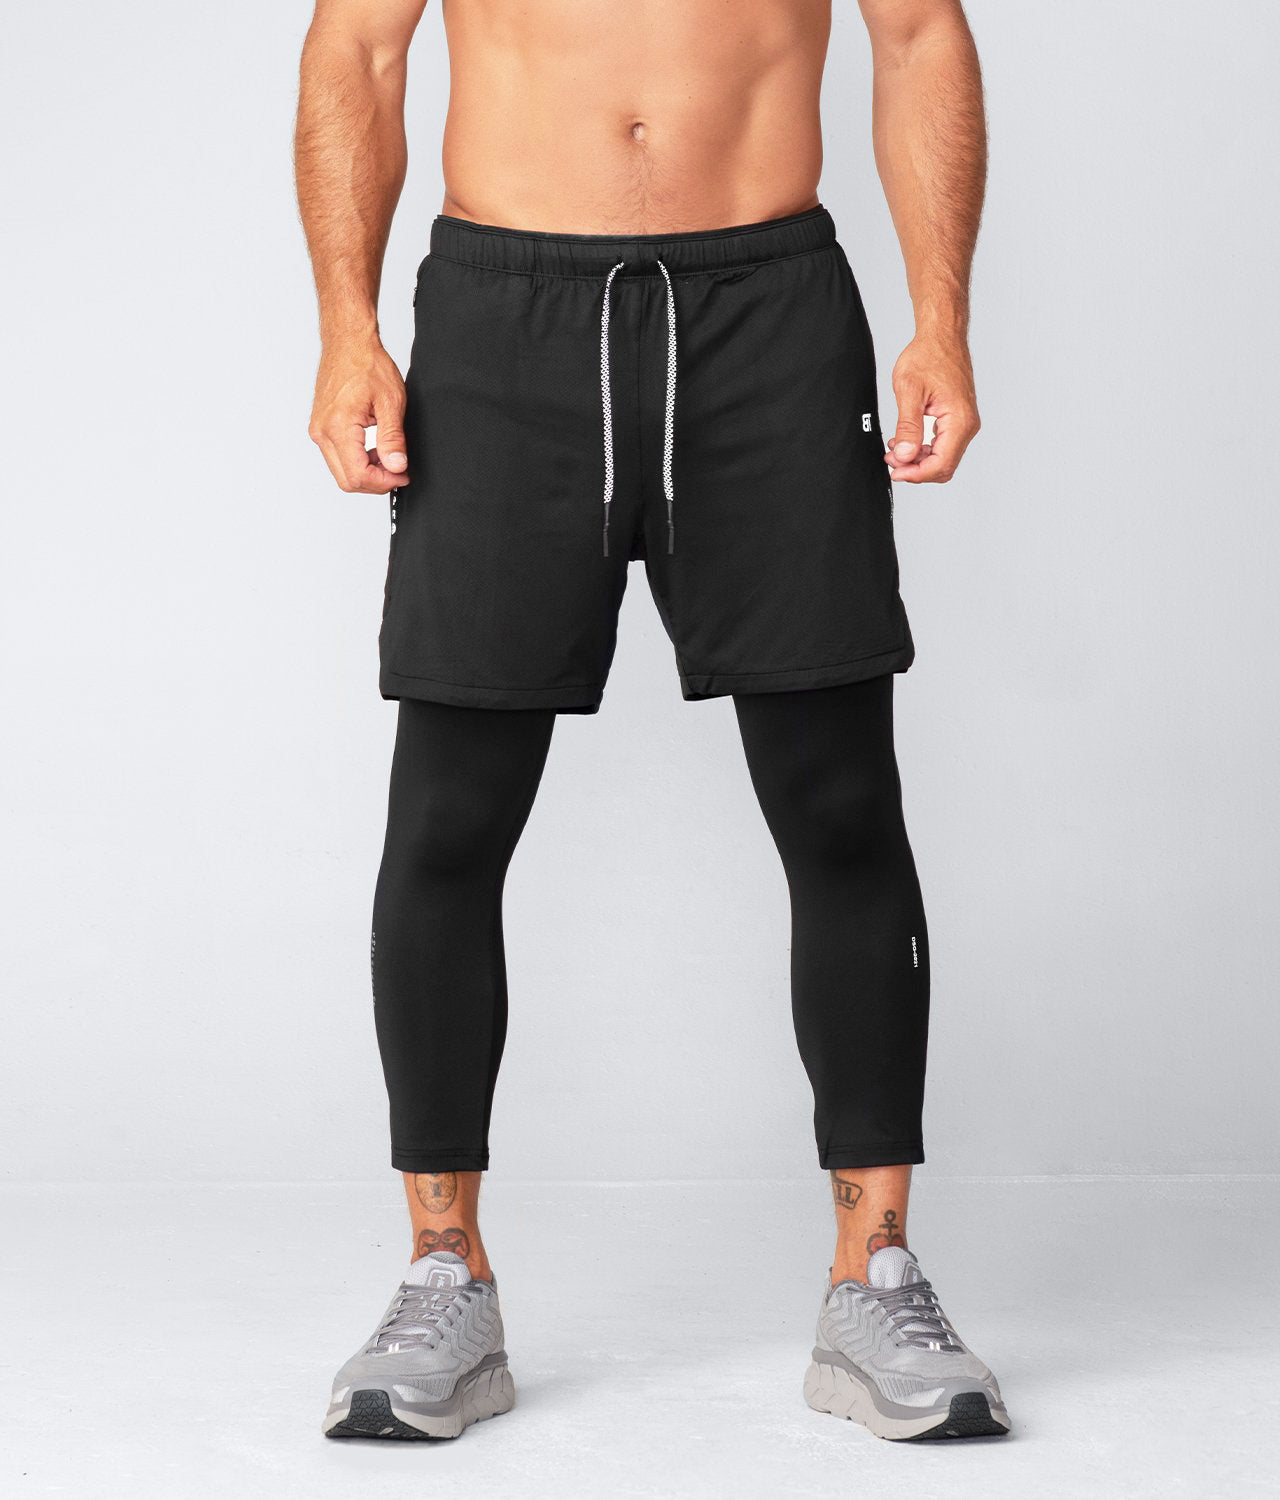 Men's Gym Shorts / Training Shorts / Athletic shorts / Fitness shorts:  Browse 51 Products up to −19%